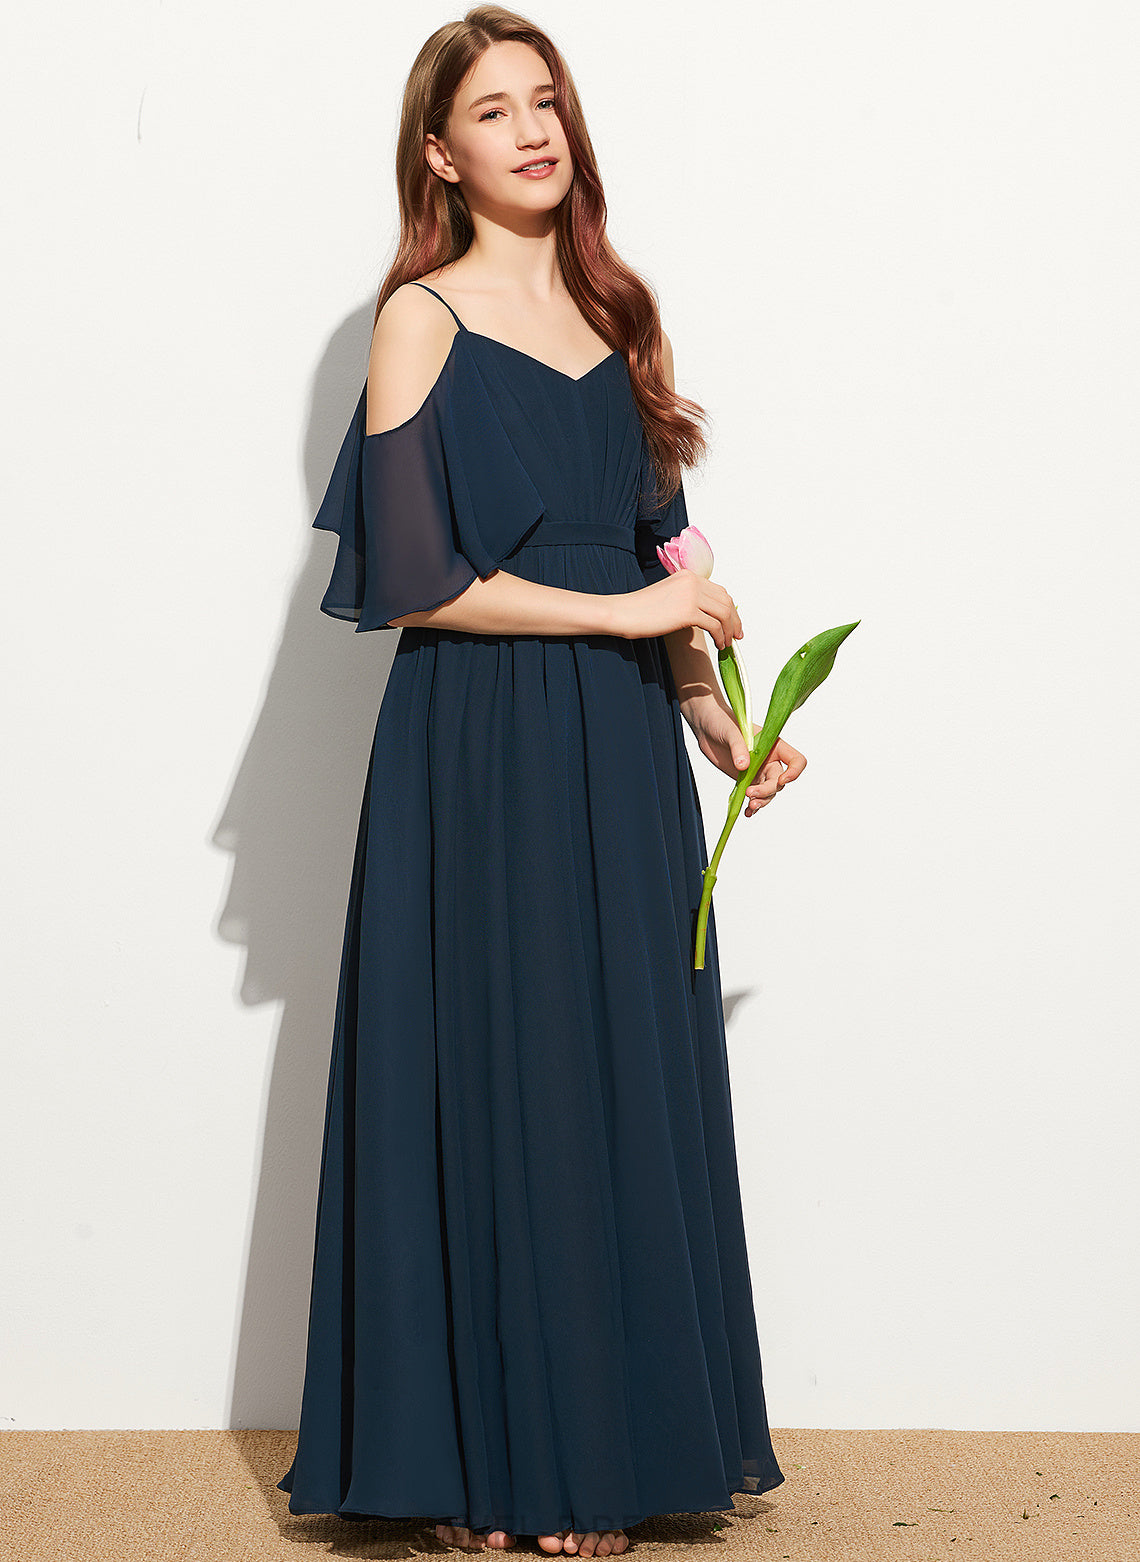 A-Line Campbell Chiffon Off-the-Shoulder With Ruffle Junior Bridesmaid Dresses Floor-Length